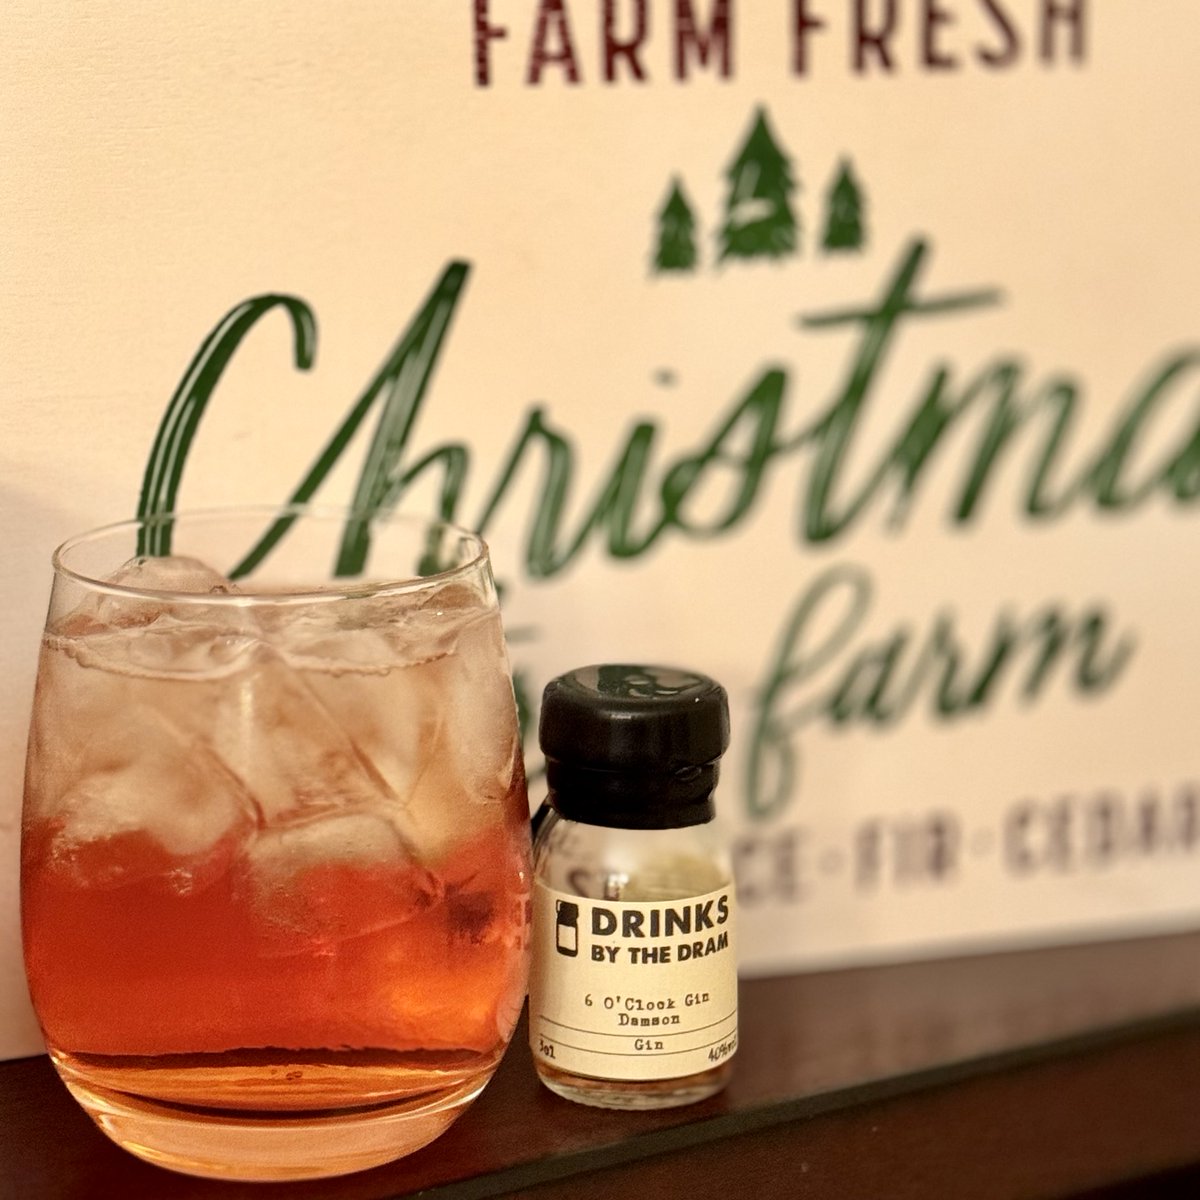 @SuntoryGlobal @Kyrodistillery @FeverTreeMixers Day 19 of #ginvent: 6 O'clock Gin Damson by 6 O'clock Gin

This is a fine gin, but it just doesn't click with me. The unique color comes from damsons (a small purple fruit like a plum) and it adds a sweet flavor that is not my favorite. Still to each their own... #cheers